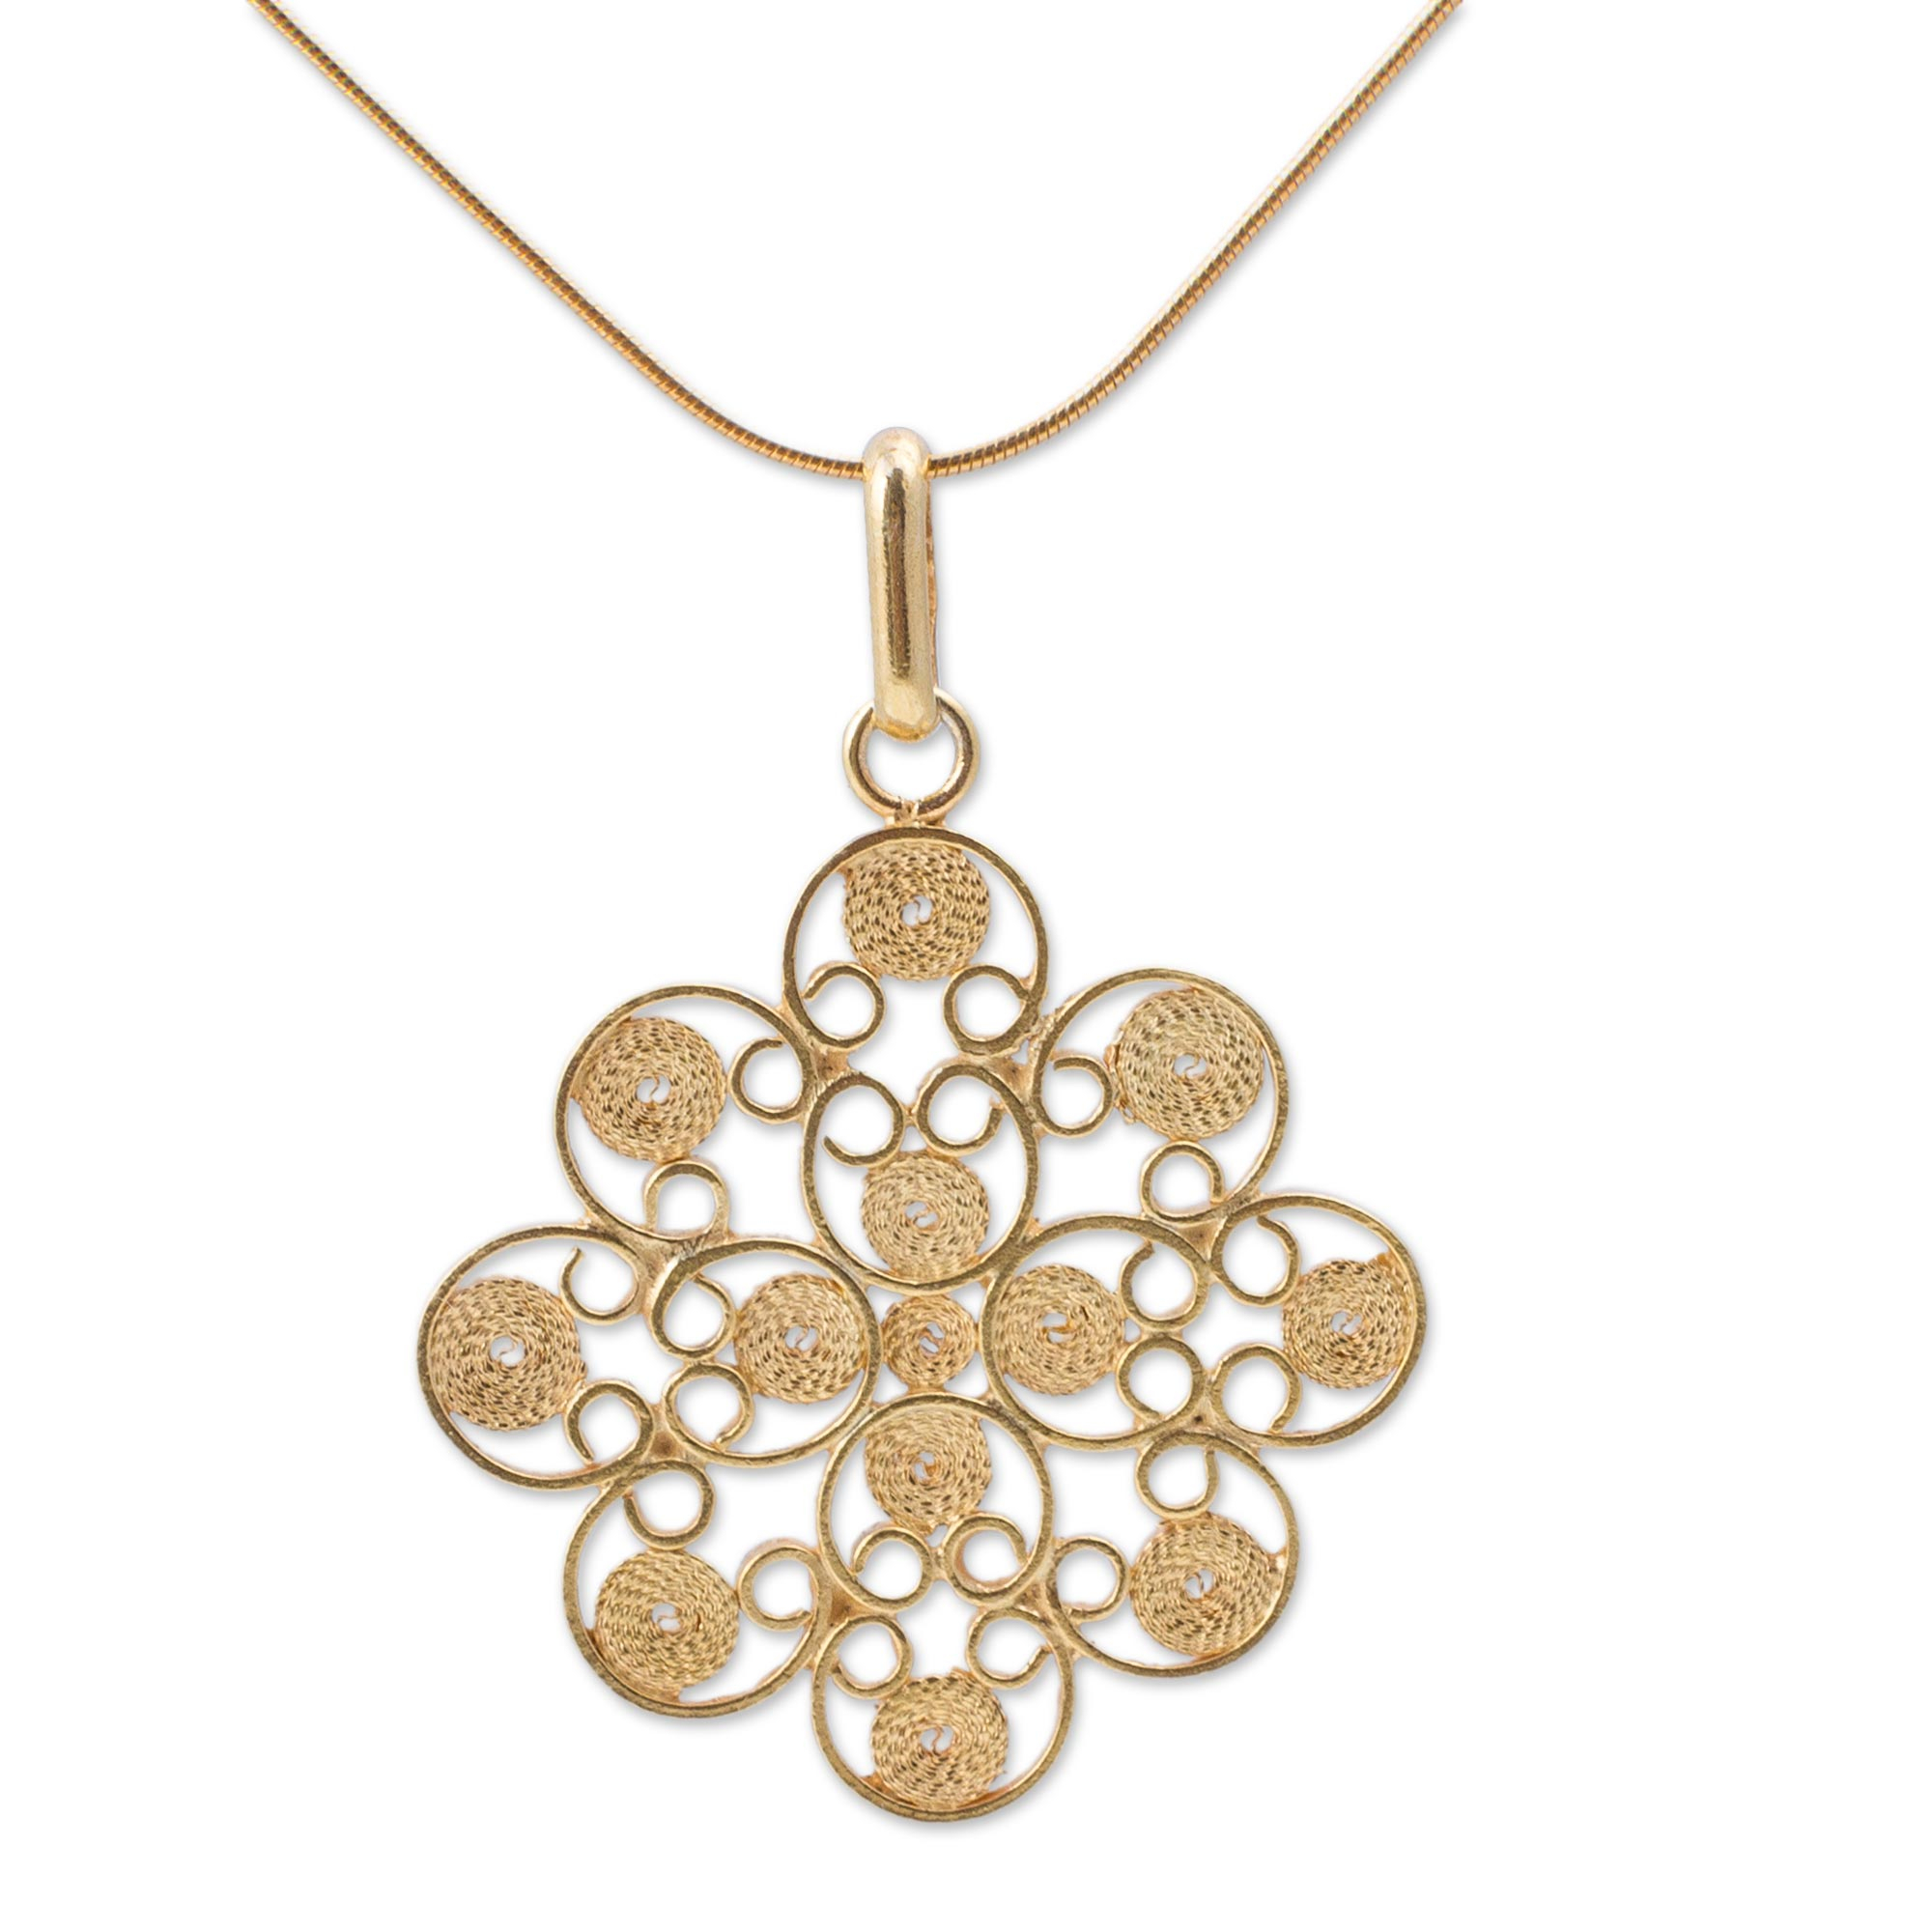 Floral Filigree Artisan Crafted Gold Vermeil Necklace - Gardenia ...